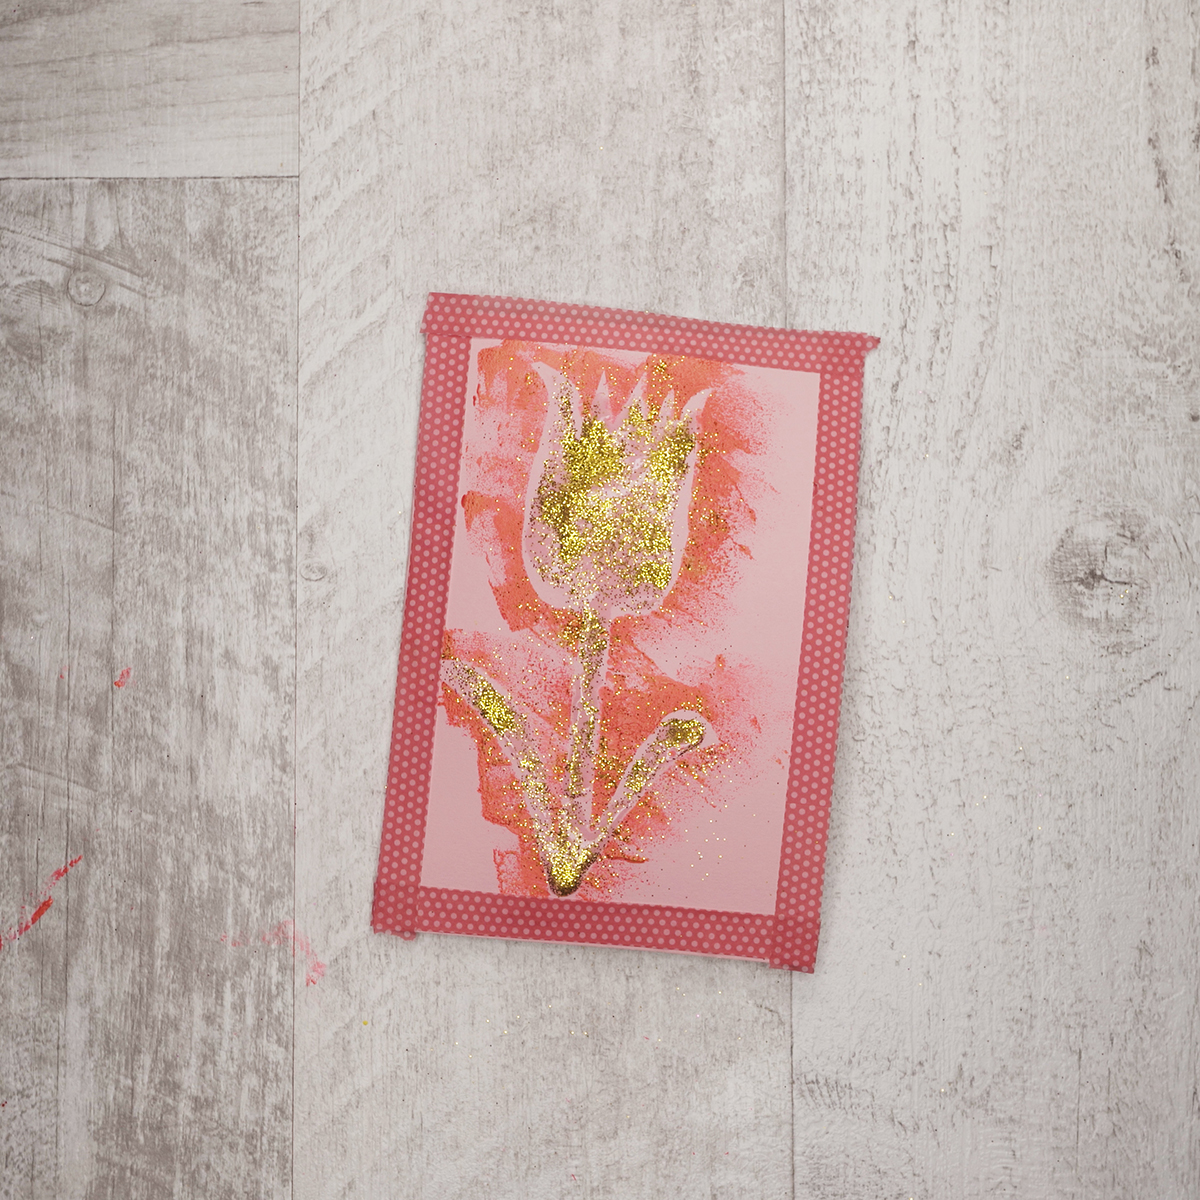 Add pink masking tape to frame the flower and you are done!